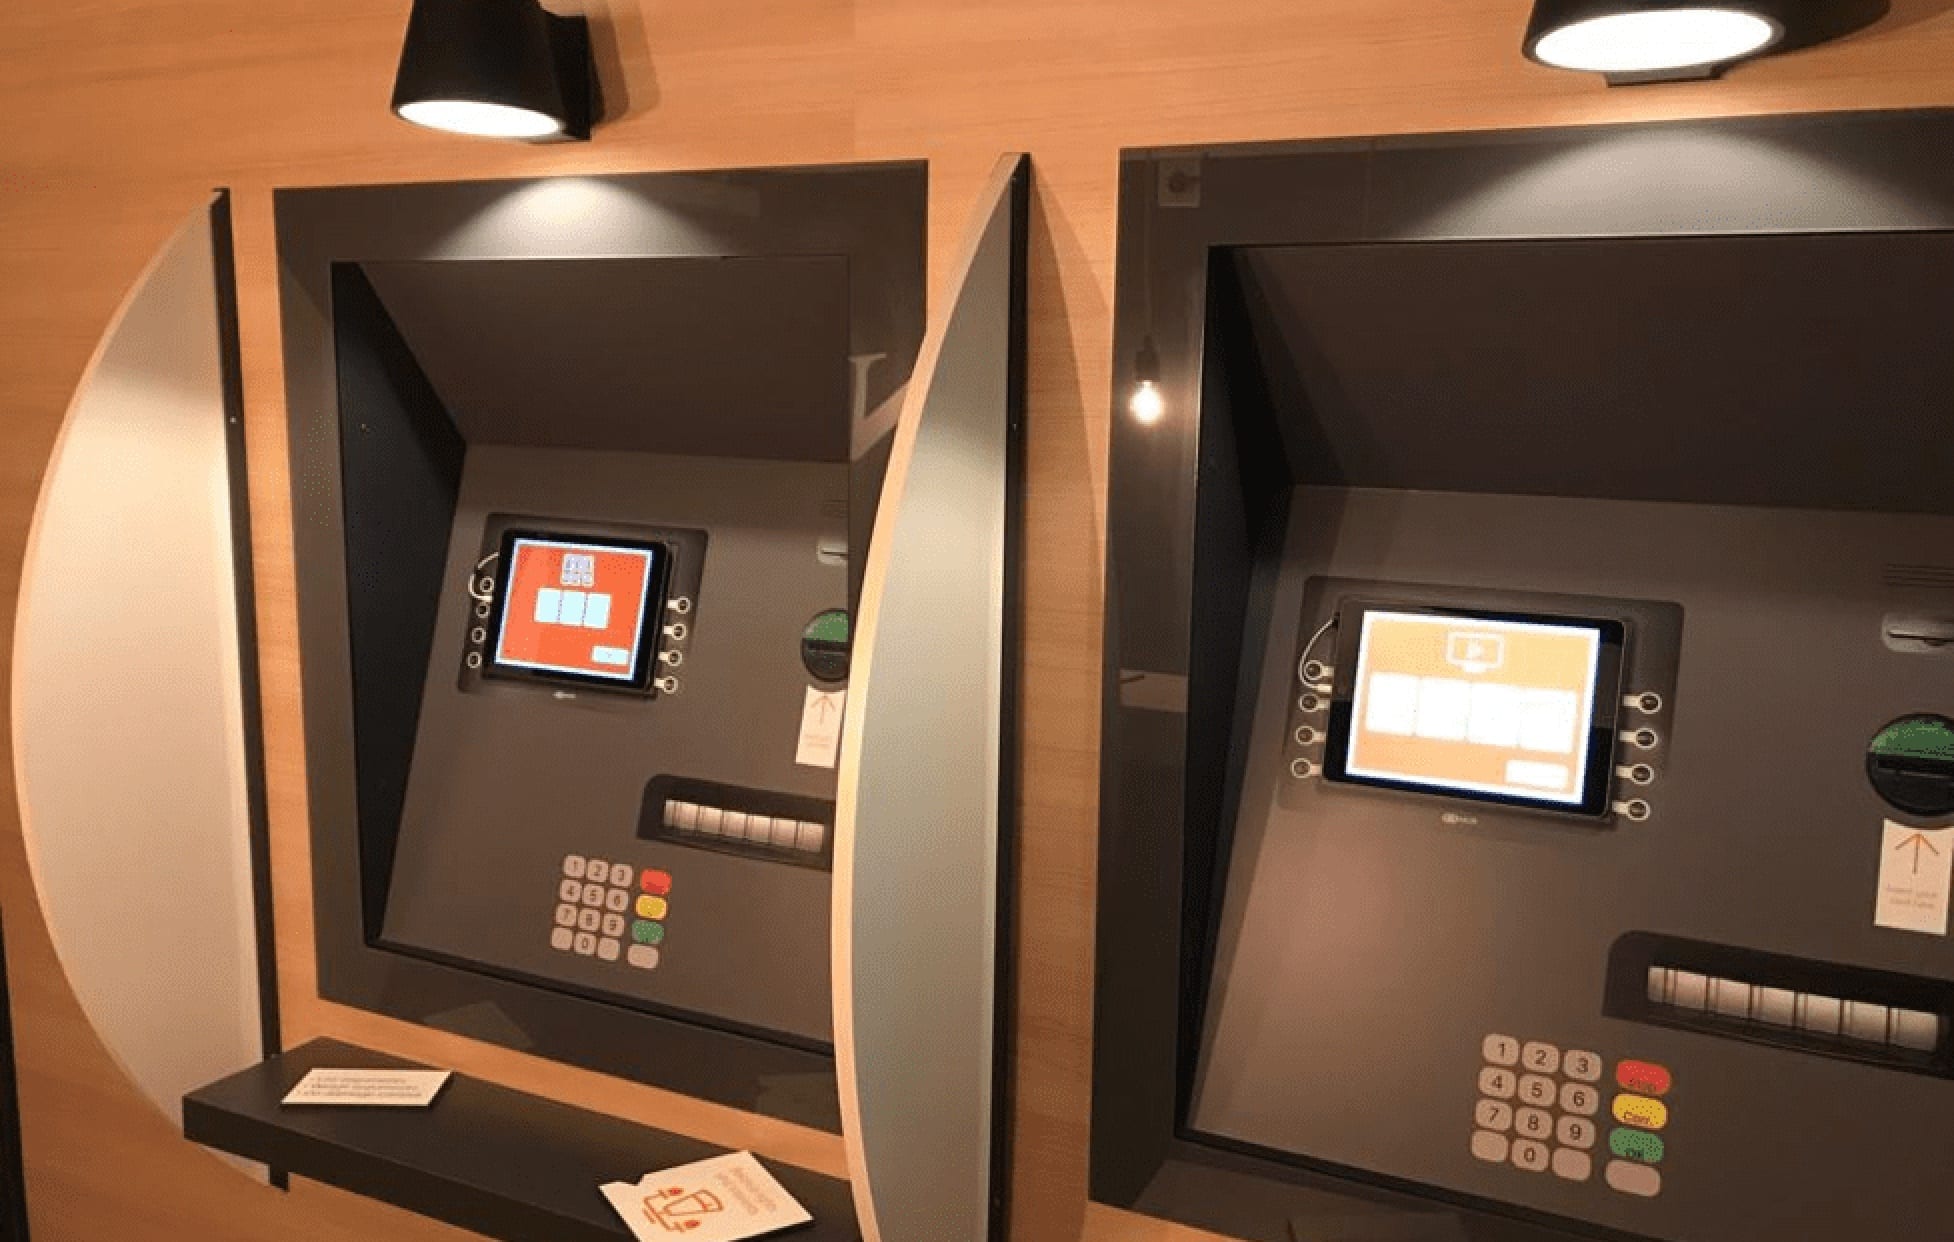 Escape room – two ATMs